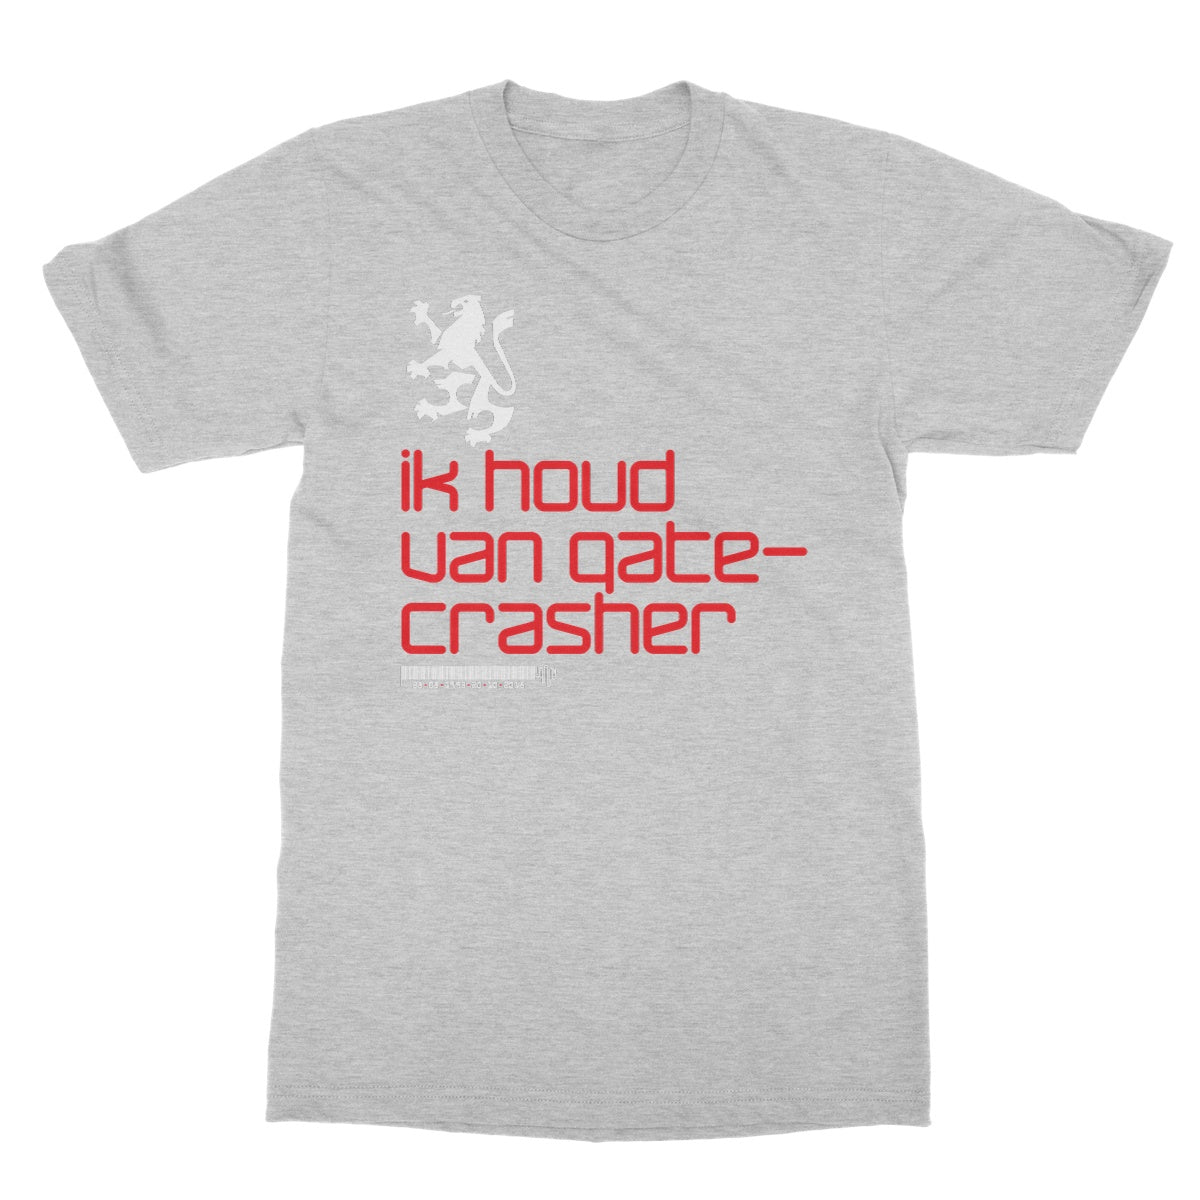 One for the Crazy Dutch Guys T-Shirt